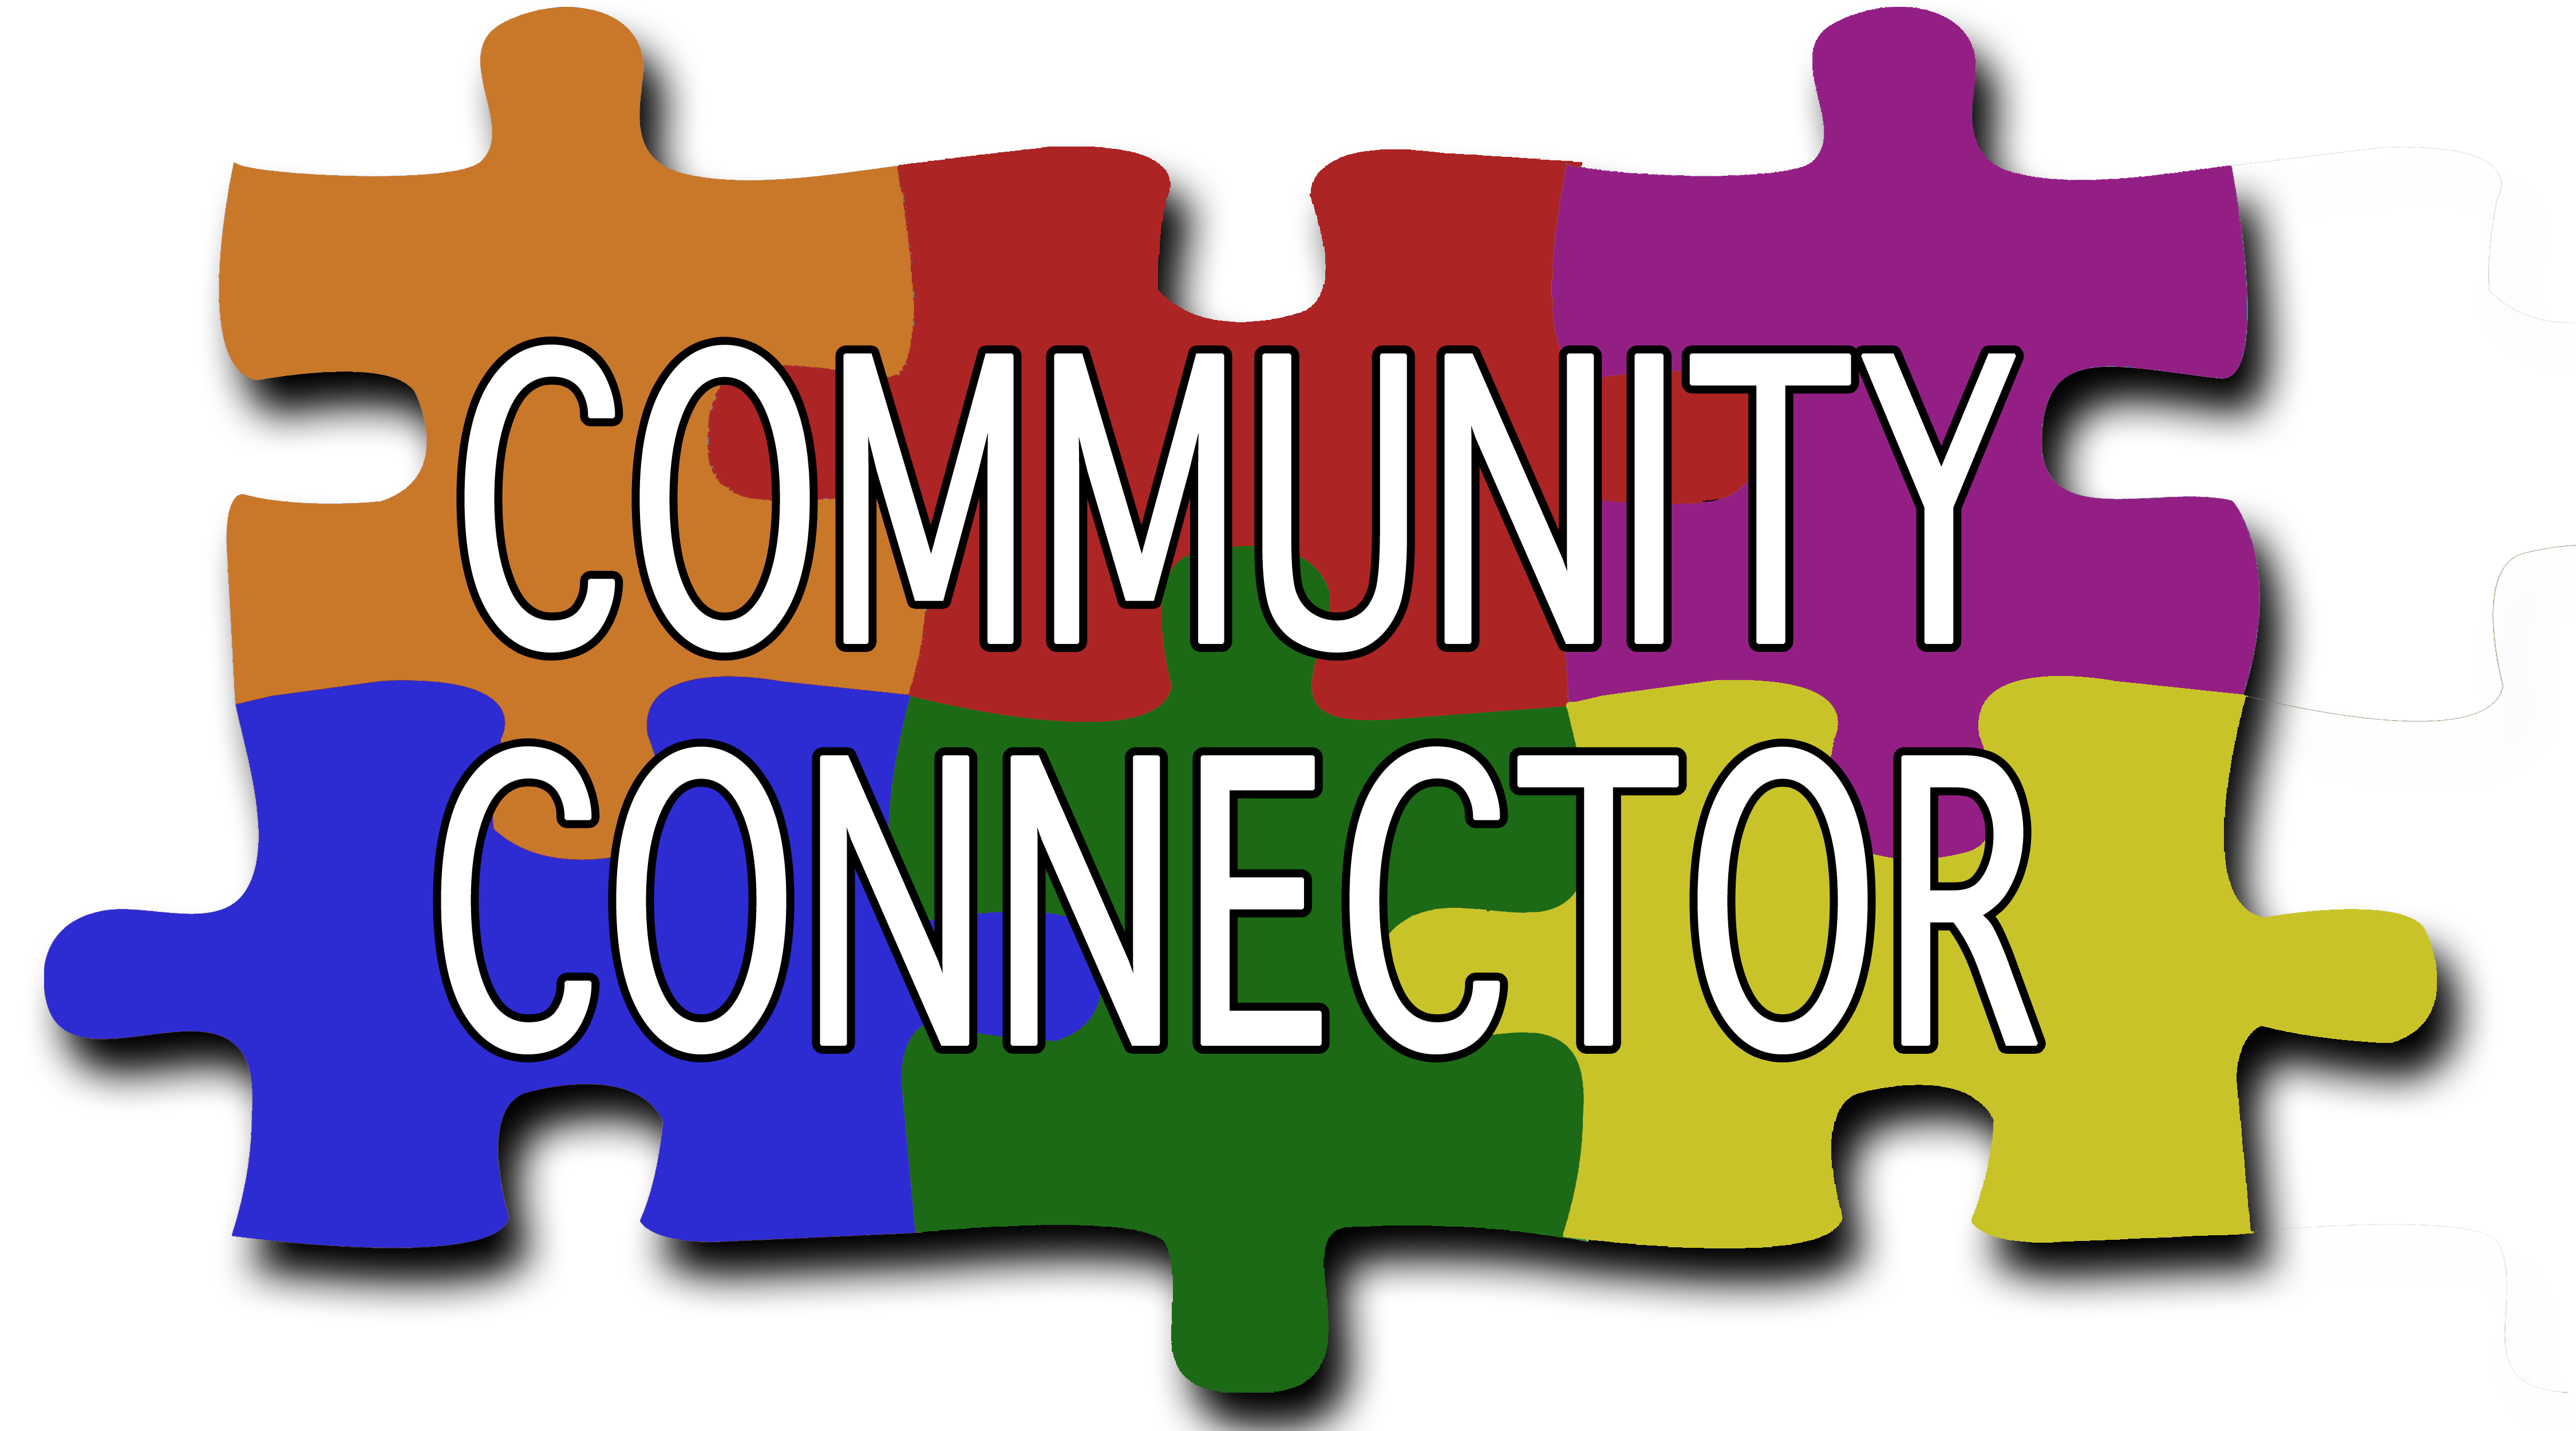 Community Connector